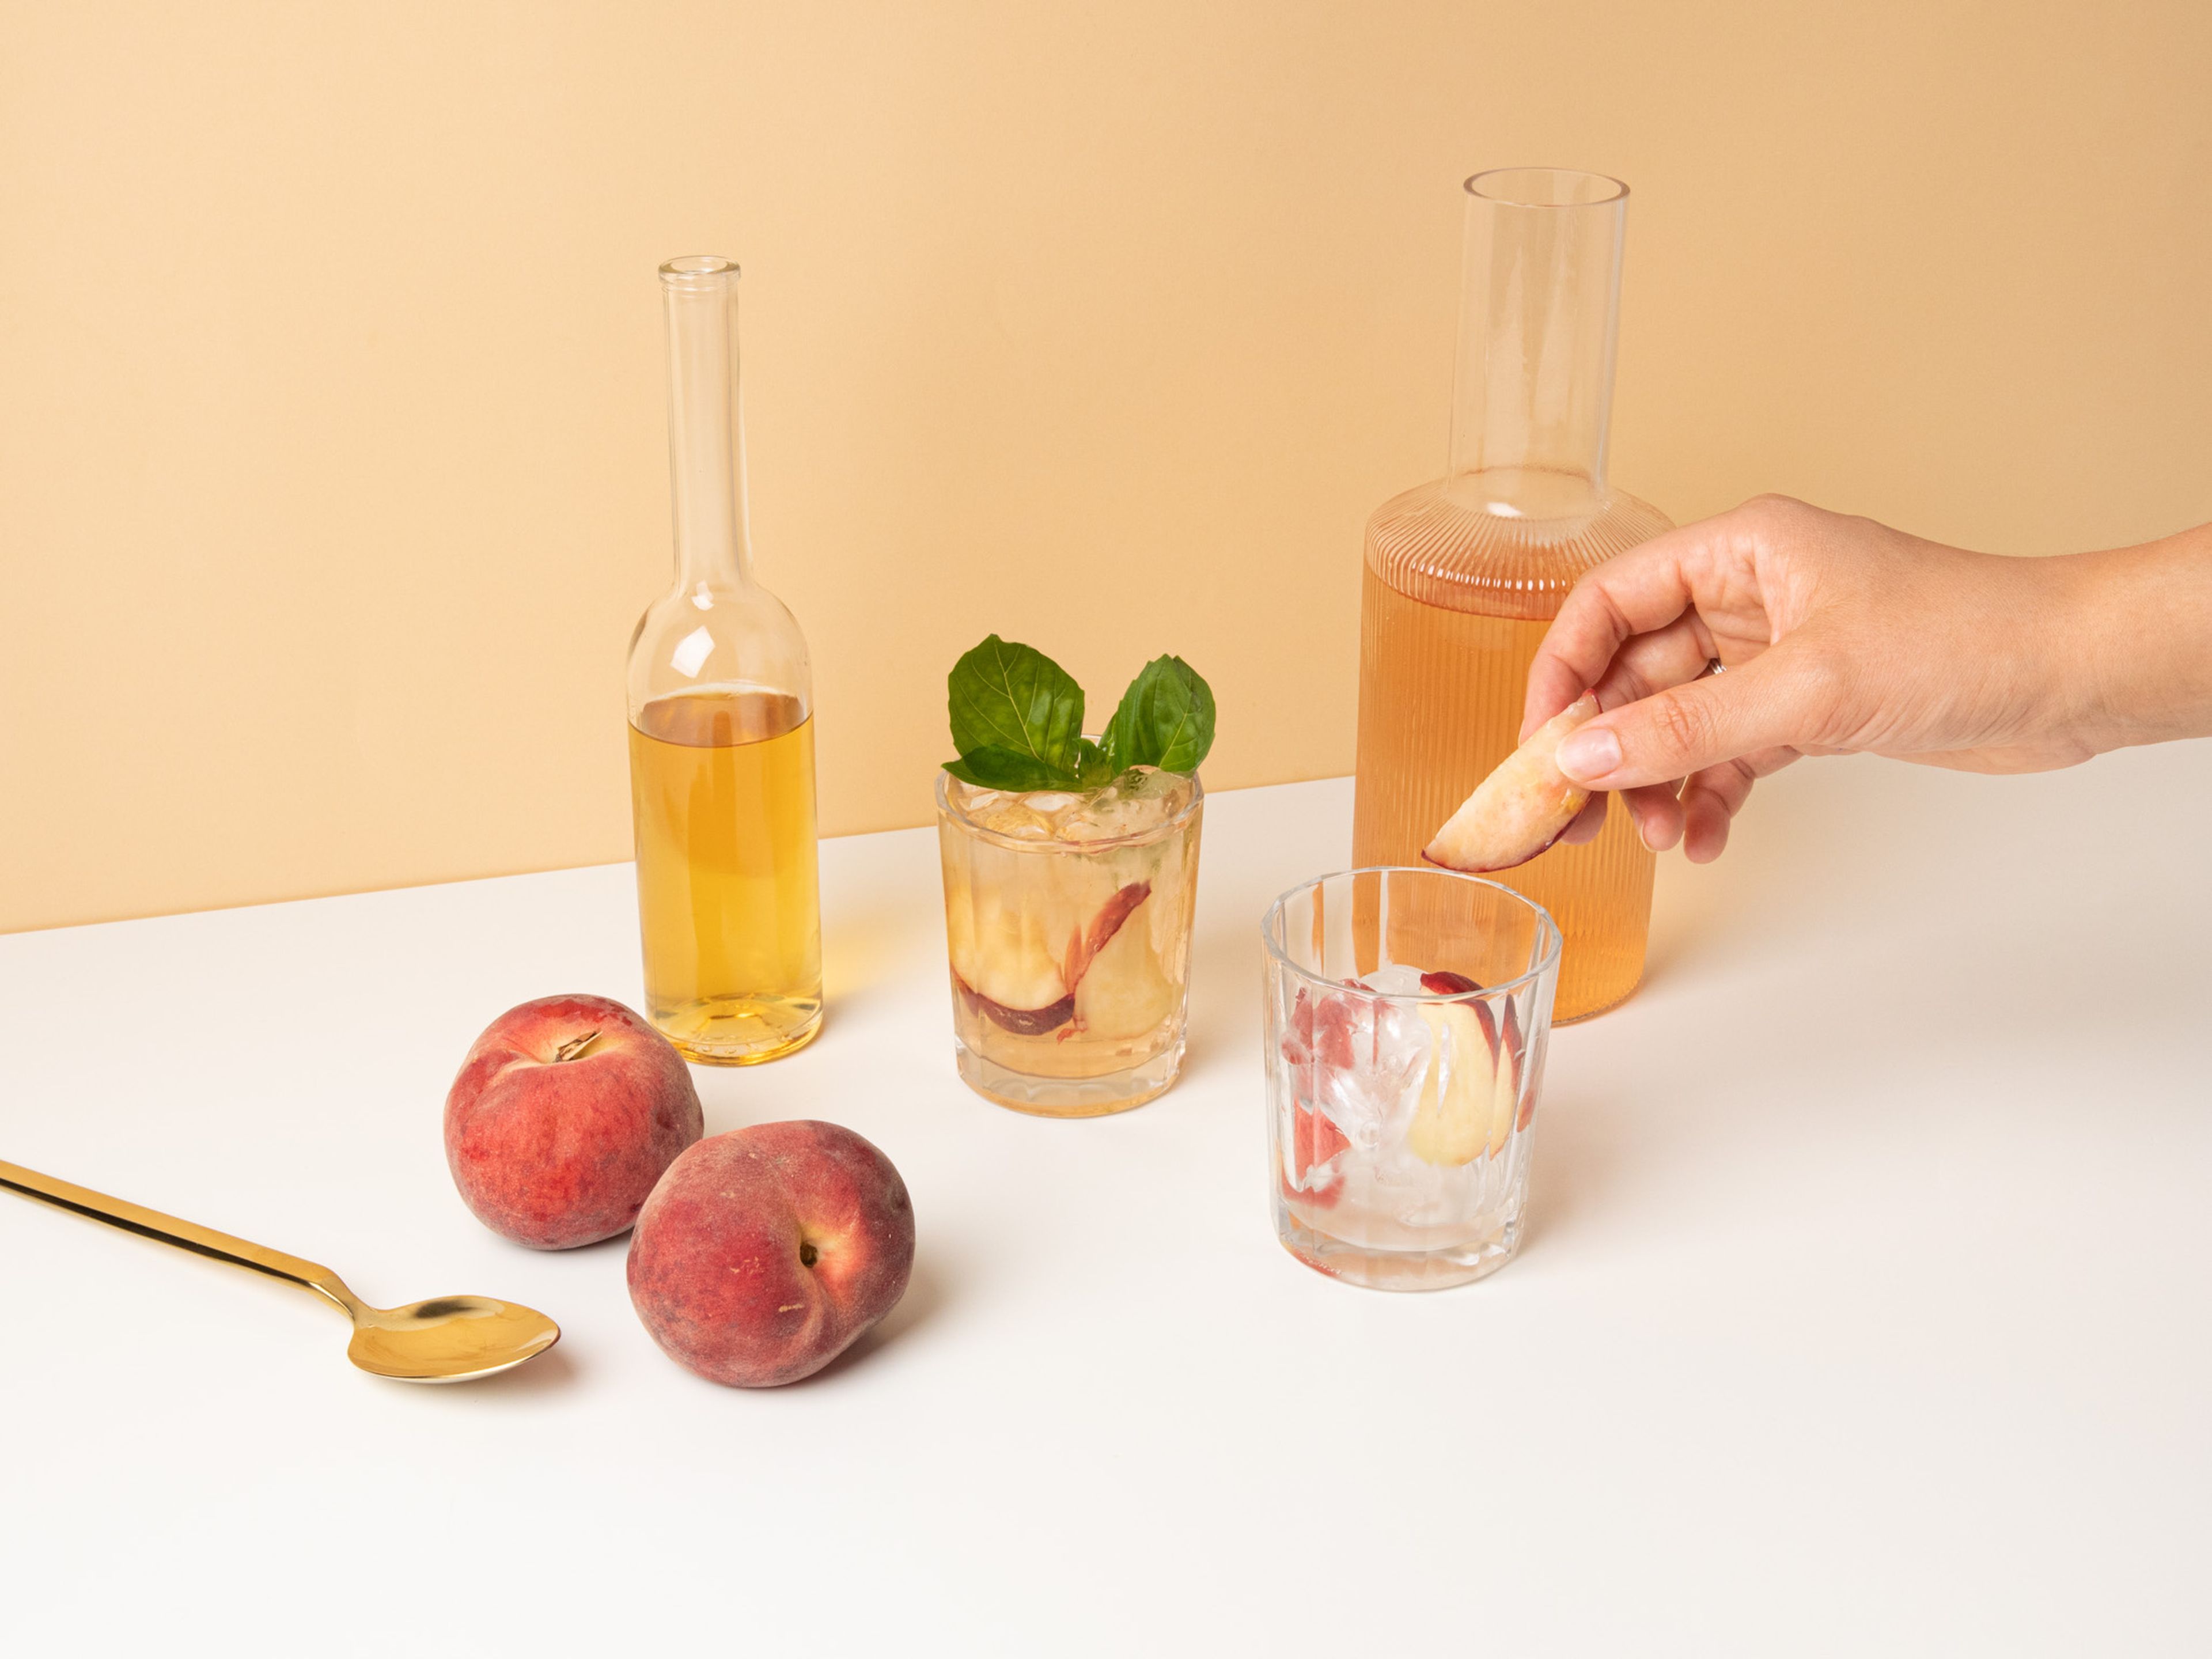 Cut peaches into pieces. Add ice to glasses, divide peaches among the glasses, and top up with the rosé spritzer. Stir to combine and garnish generously with basil. Enjoy!